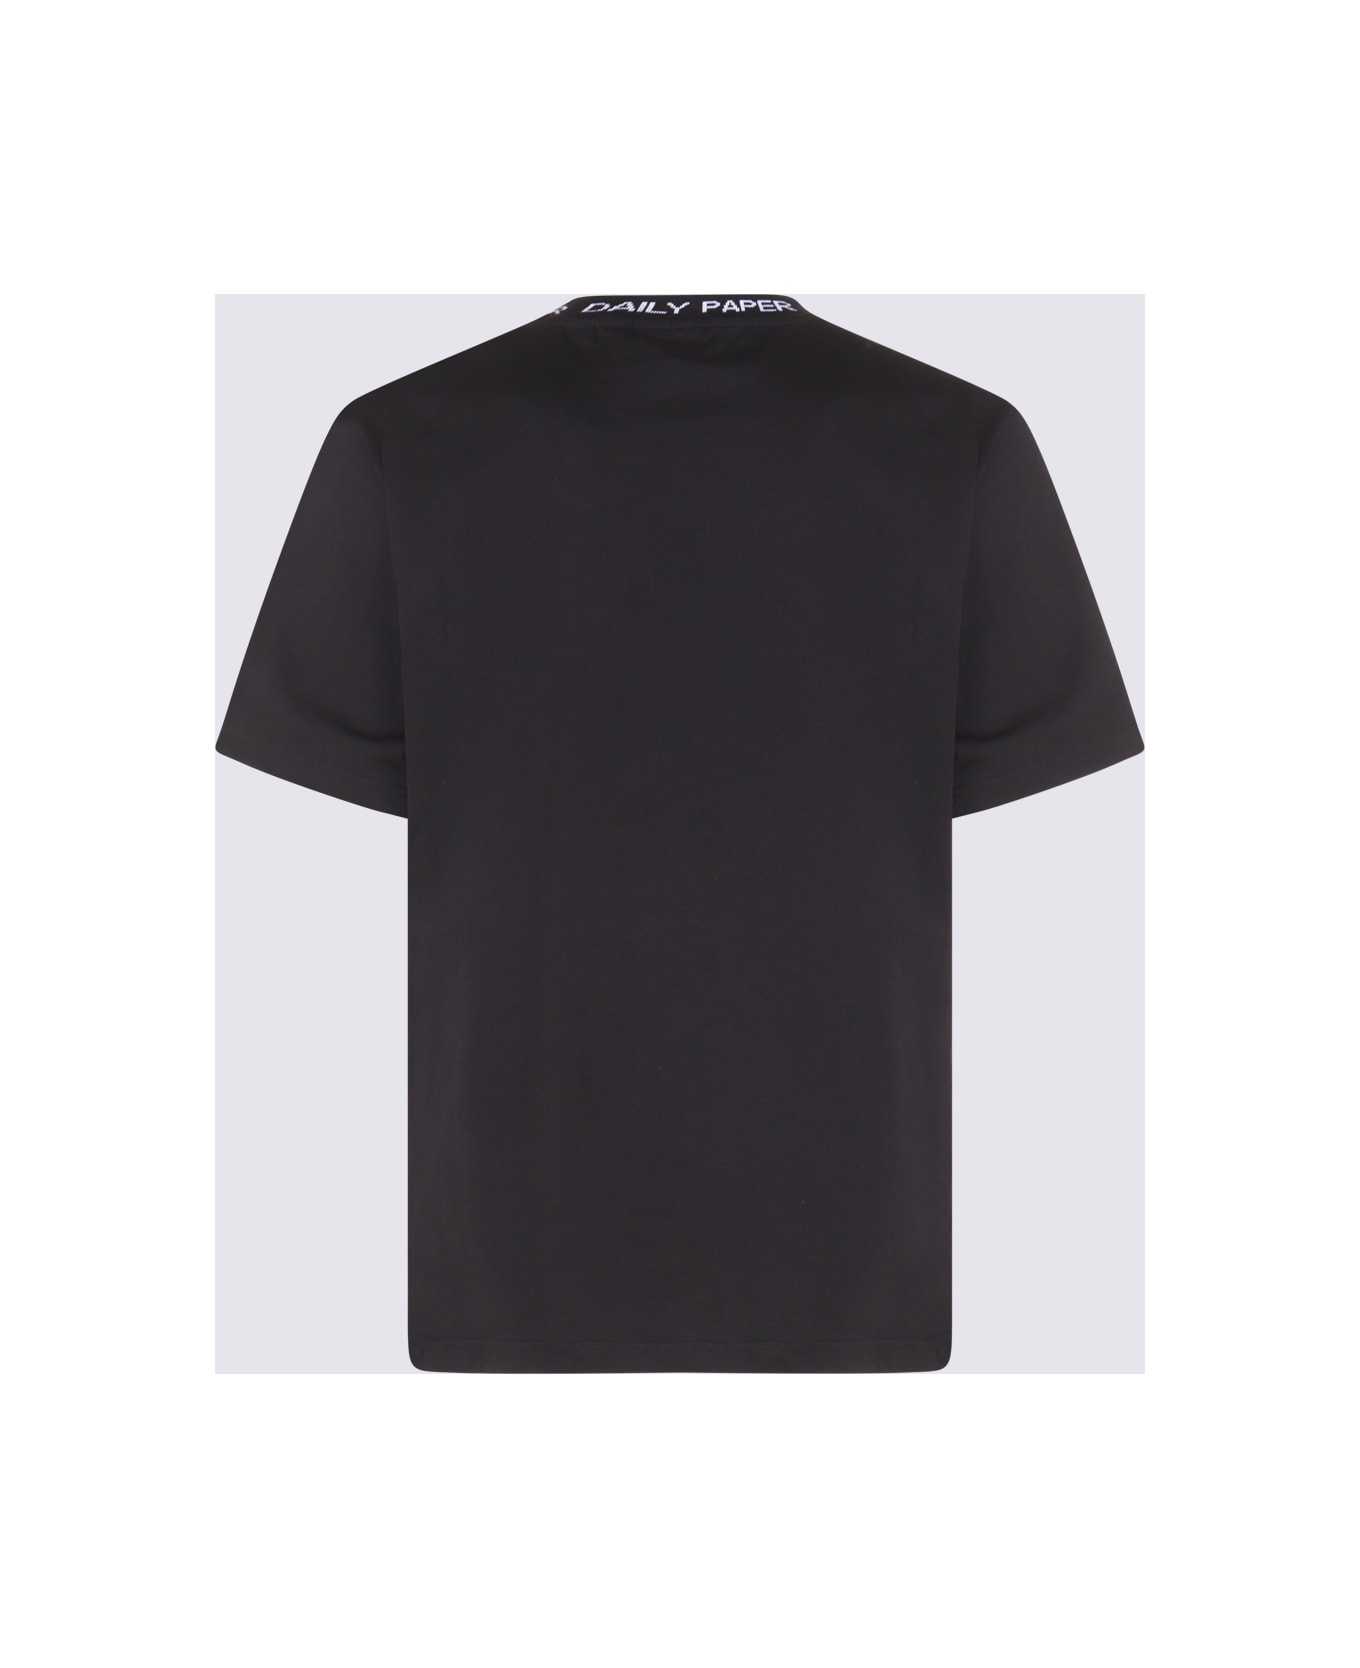 Daily Paper Black And White Cotton T-shirt - Black シャツ